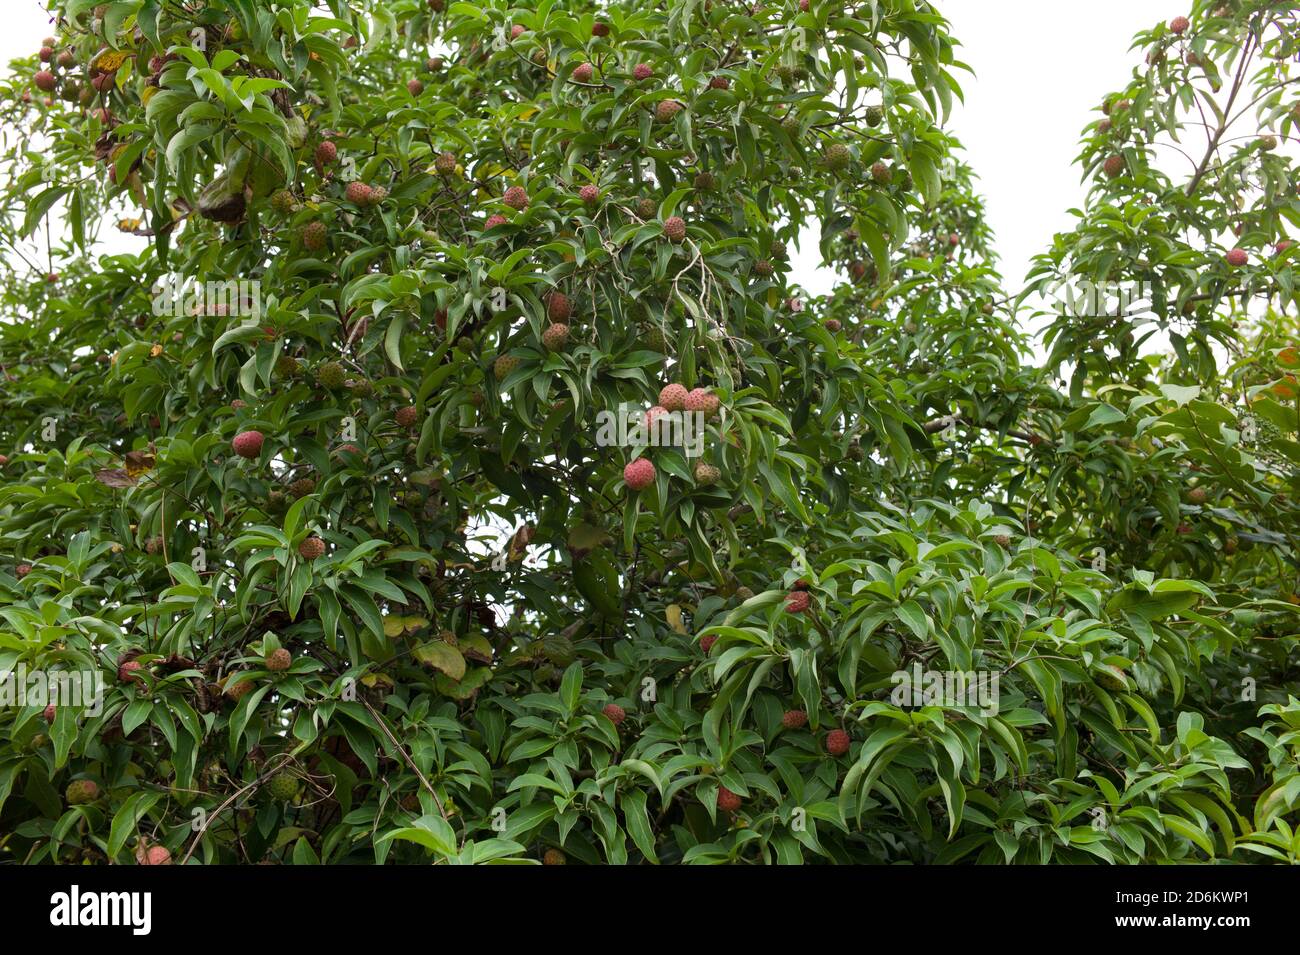 Cornus kousa with fruit and other shrubs in a domestic setting Stock Photo